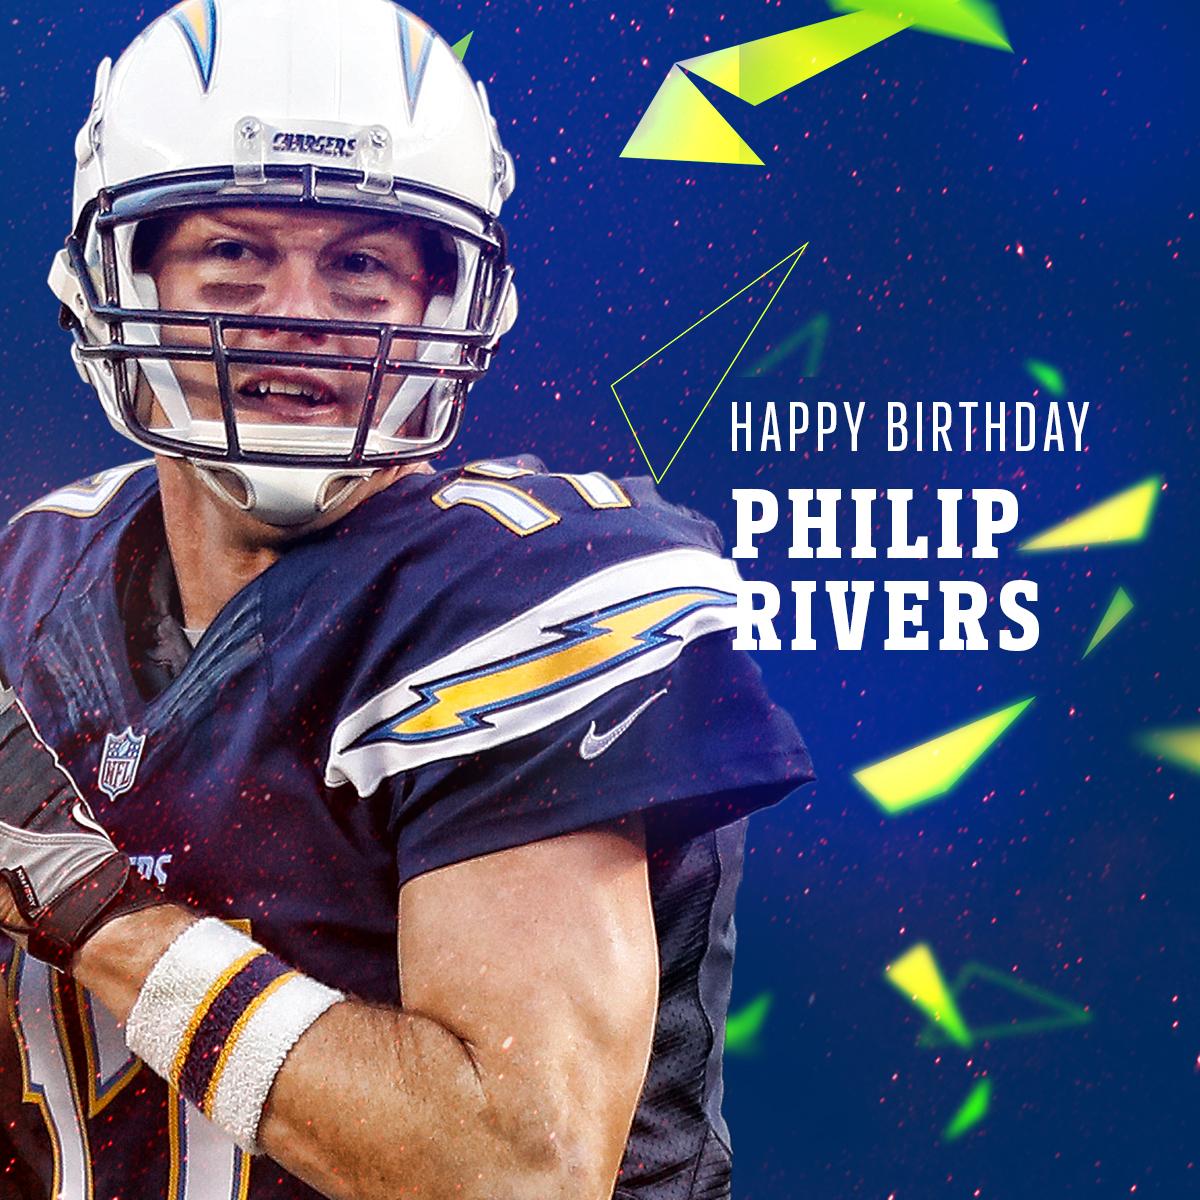       Join us in wishing QB Philip Rivers a HAPPY BIRTHDAY! 